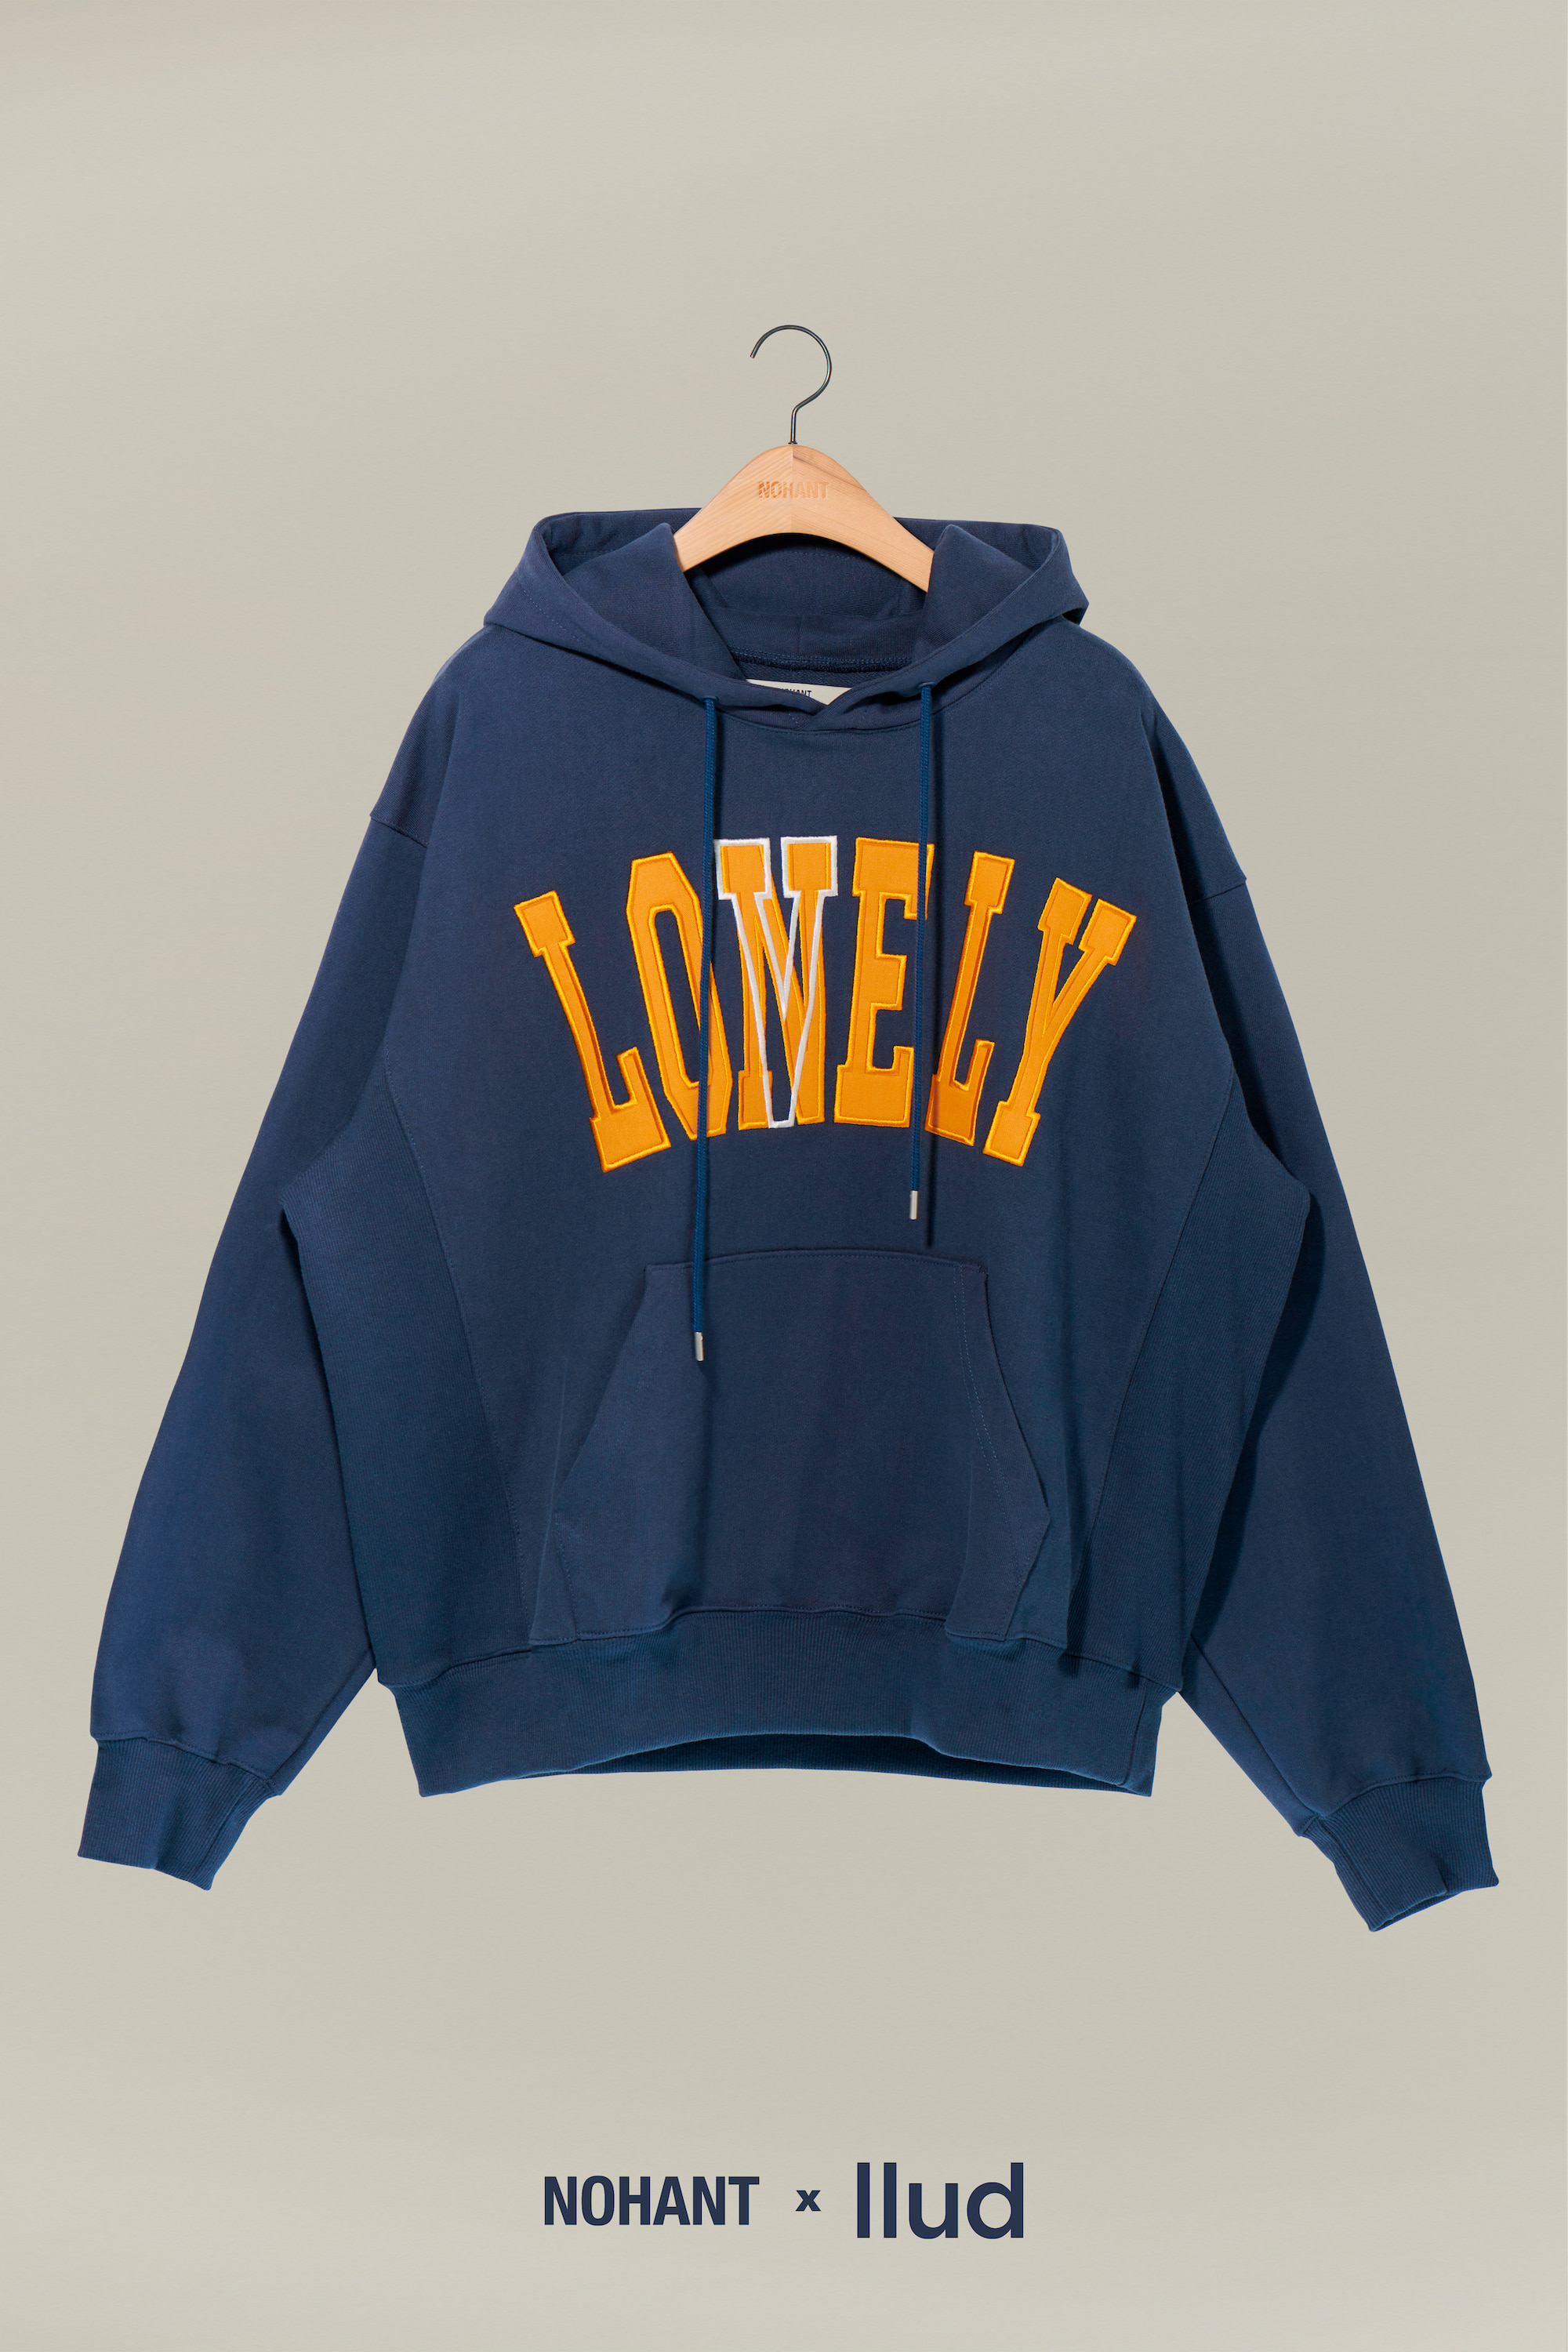 LONELY/LOVELY HOODIE NAVY